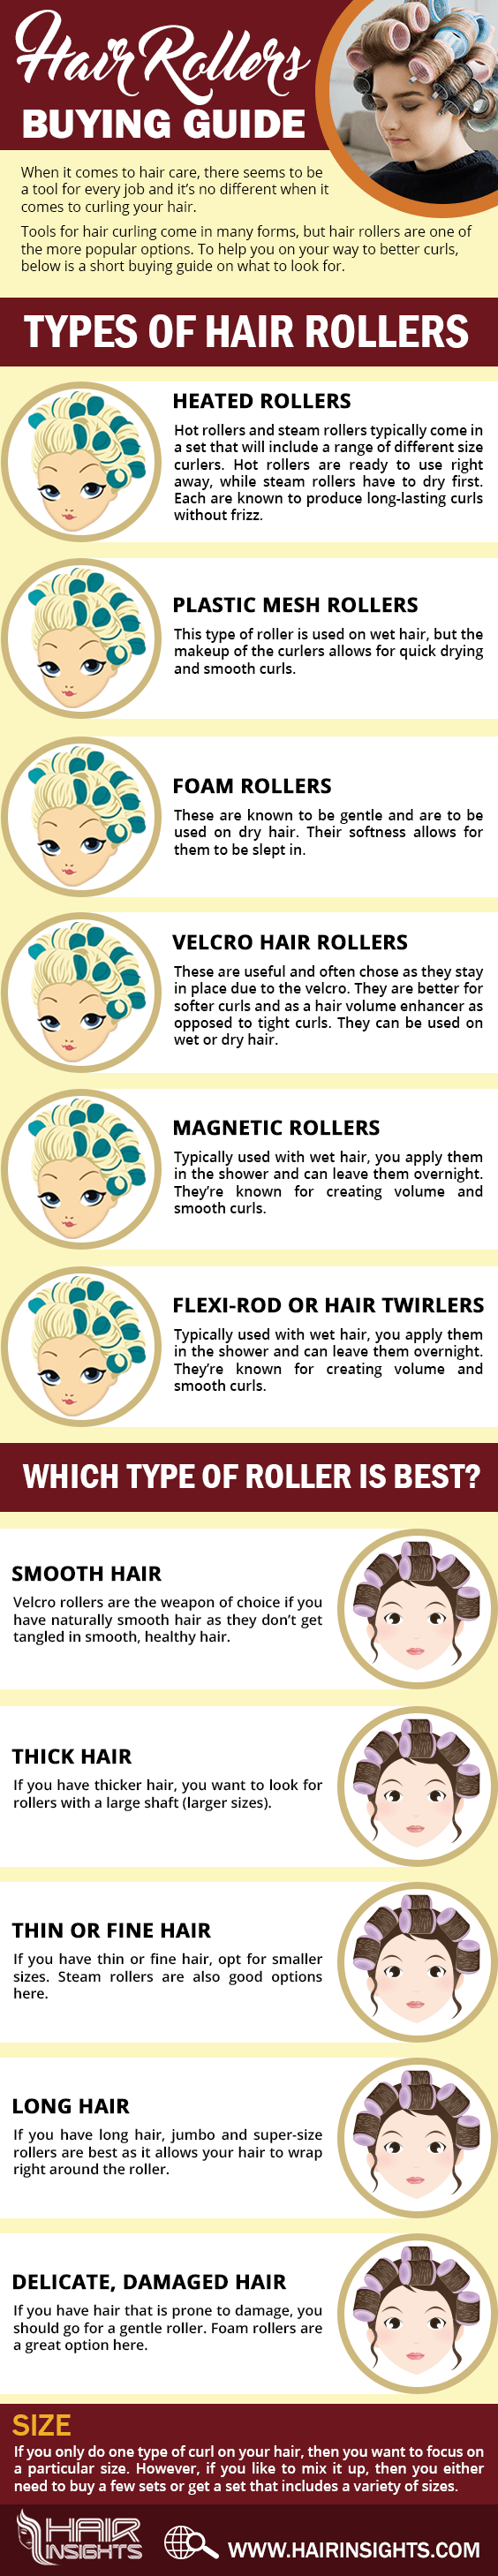 hot rollers infographic